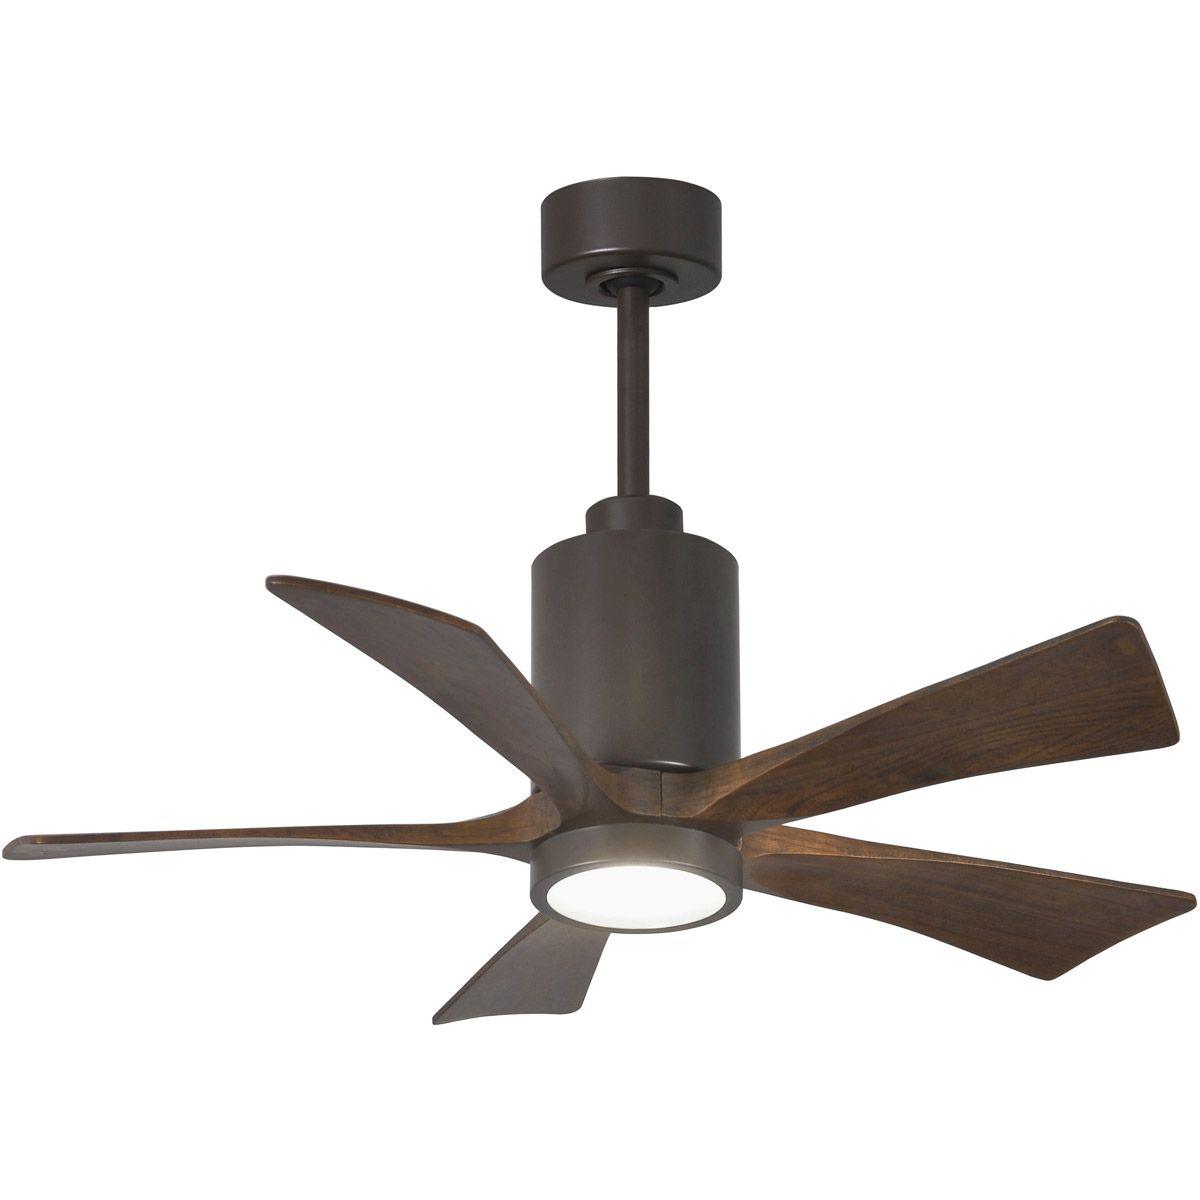 Patricia 42 Inch 5 Blades Modern Outdoor Ceiling Fan With Light, Wall And Remote Control Included